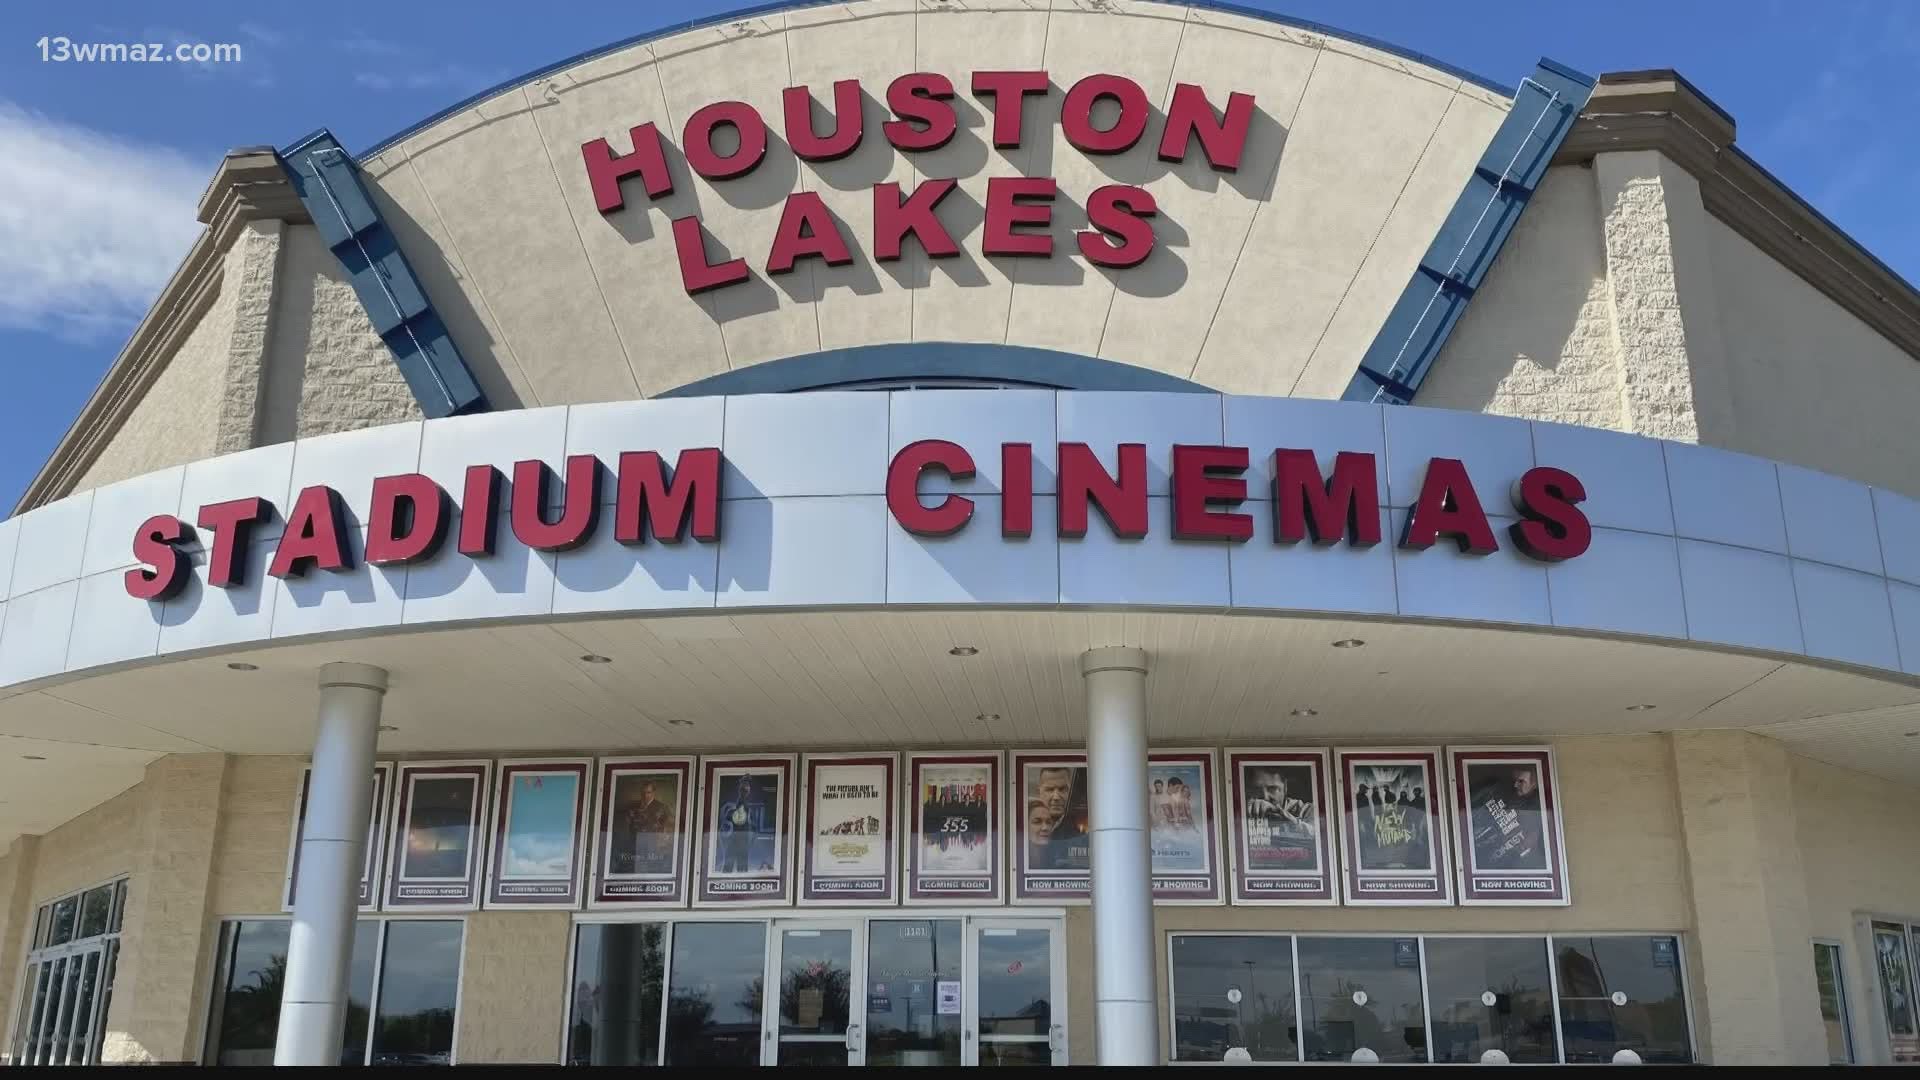 Movie theatres across the country are slowly reopening and that includes some in Central Georgia, but like many things, life and business are different